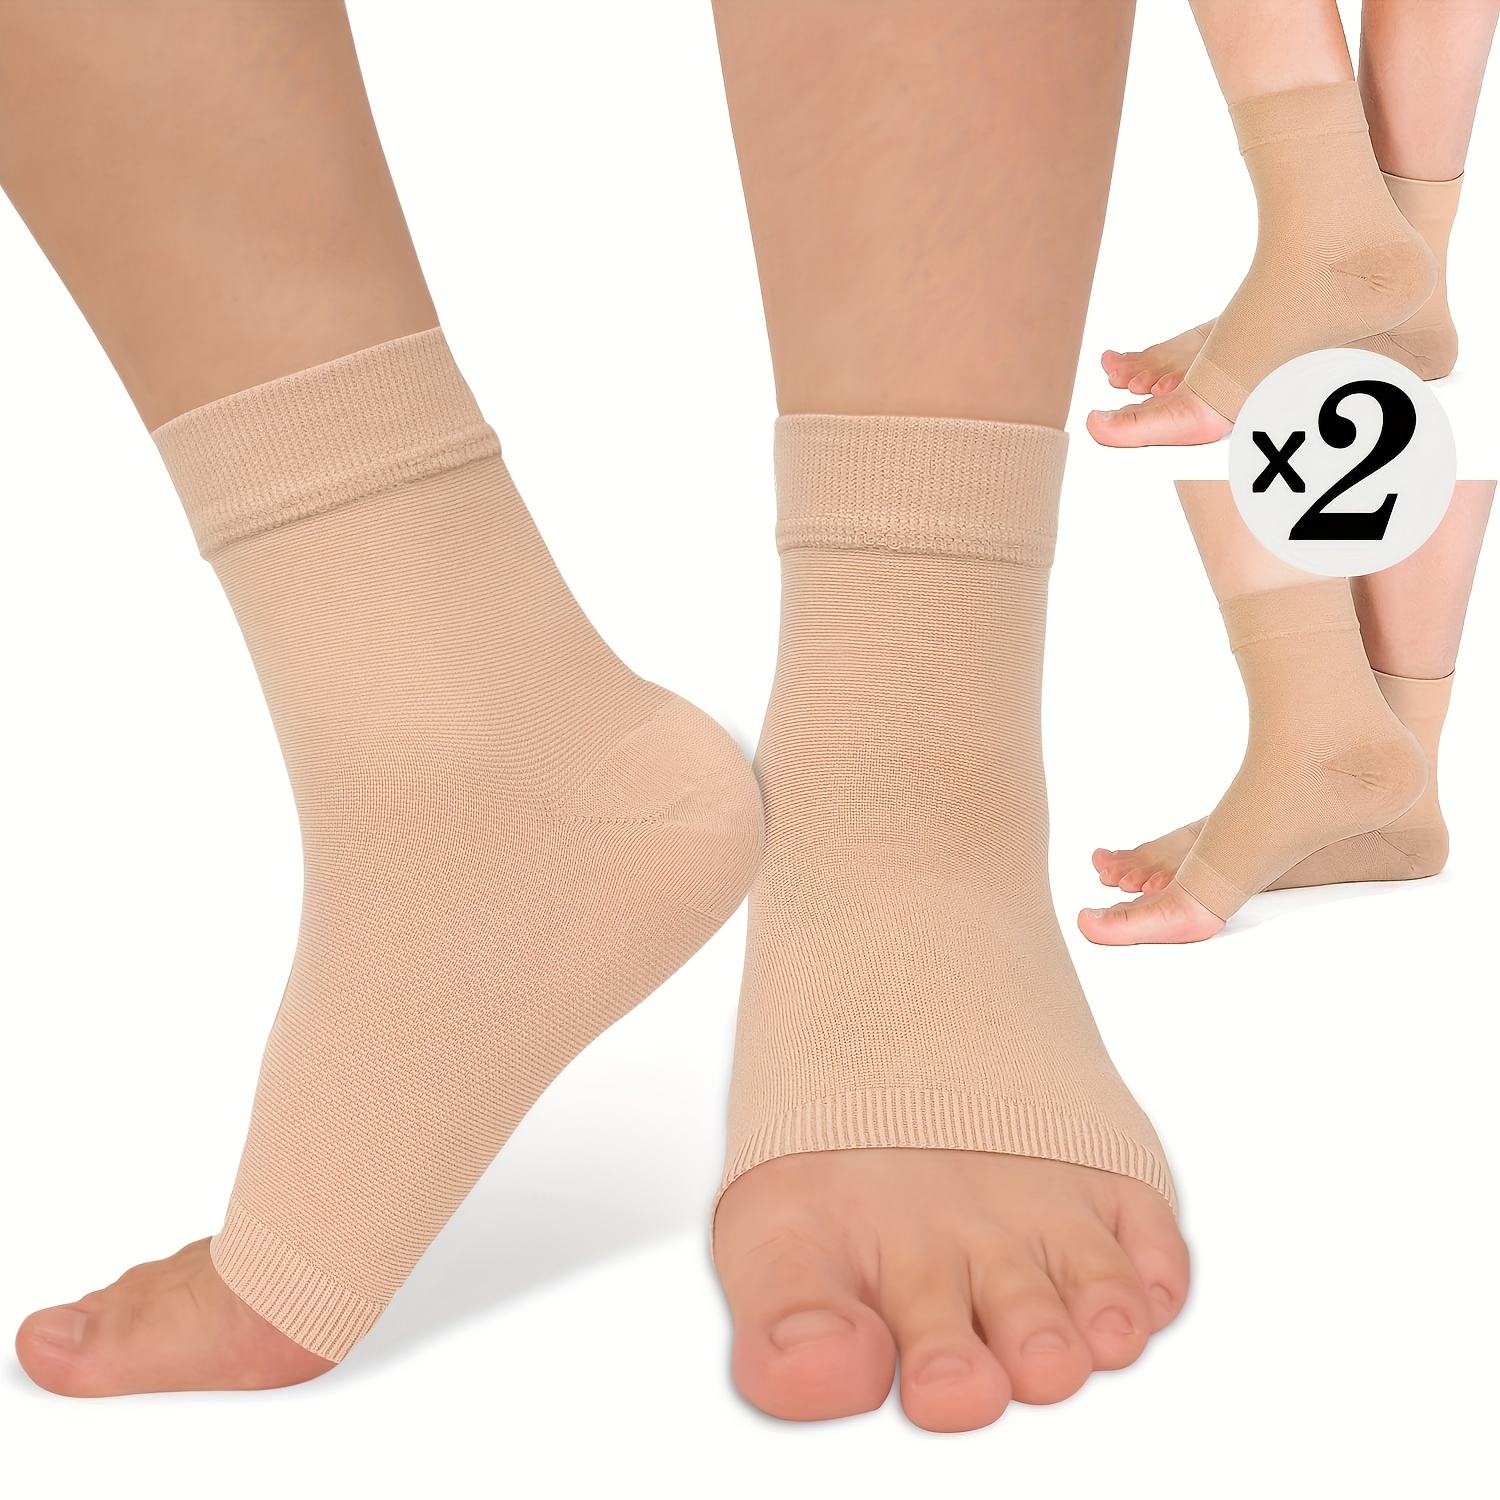 

2 Pairs Ankle Brace Compression Sleeve Open Toe Сompression Socks For Women Men